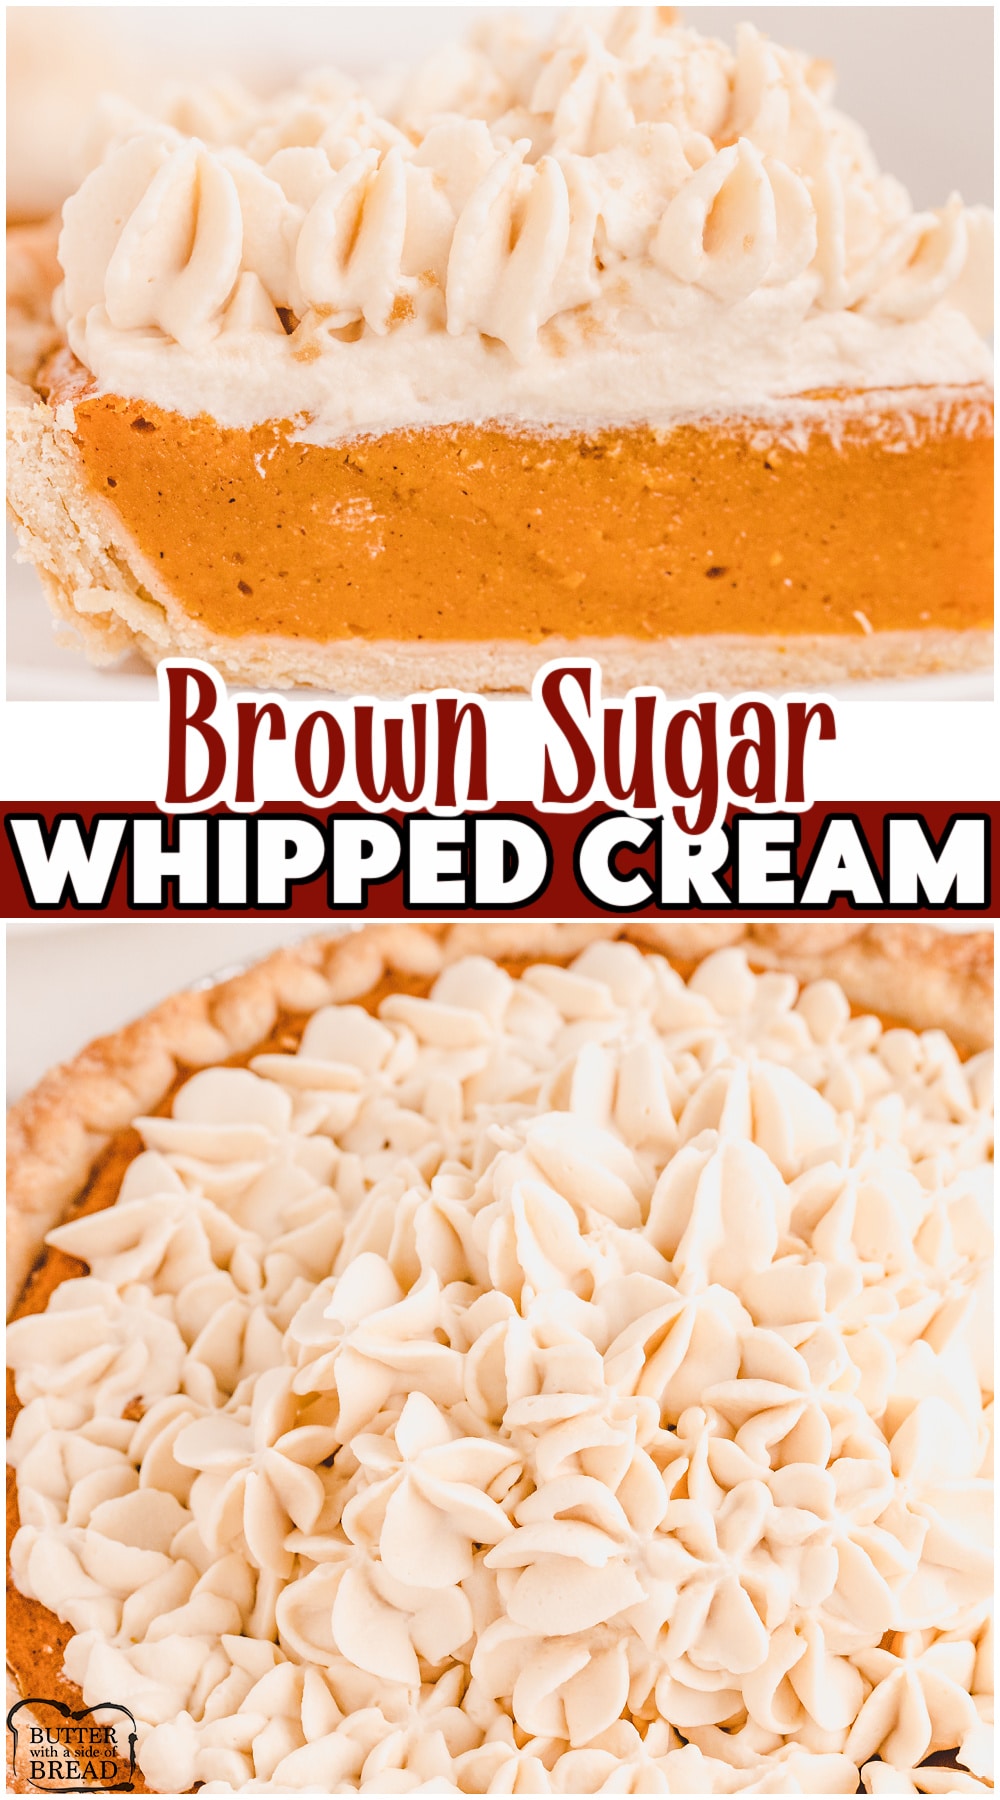 Brown Sugar Whipped Cream adds that special flavor to holiday pies! Made with just heavy cream, brown sugar & vanilla, you'll love the flavor in this homemade whipped cream recipe! 